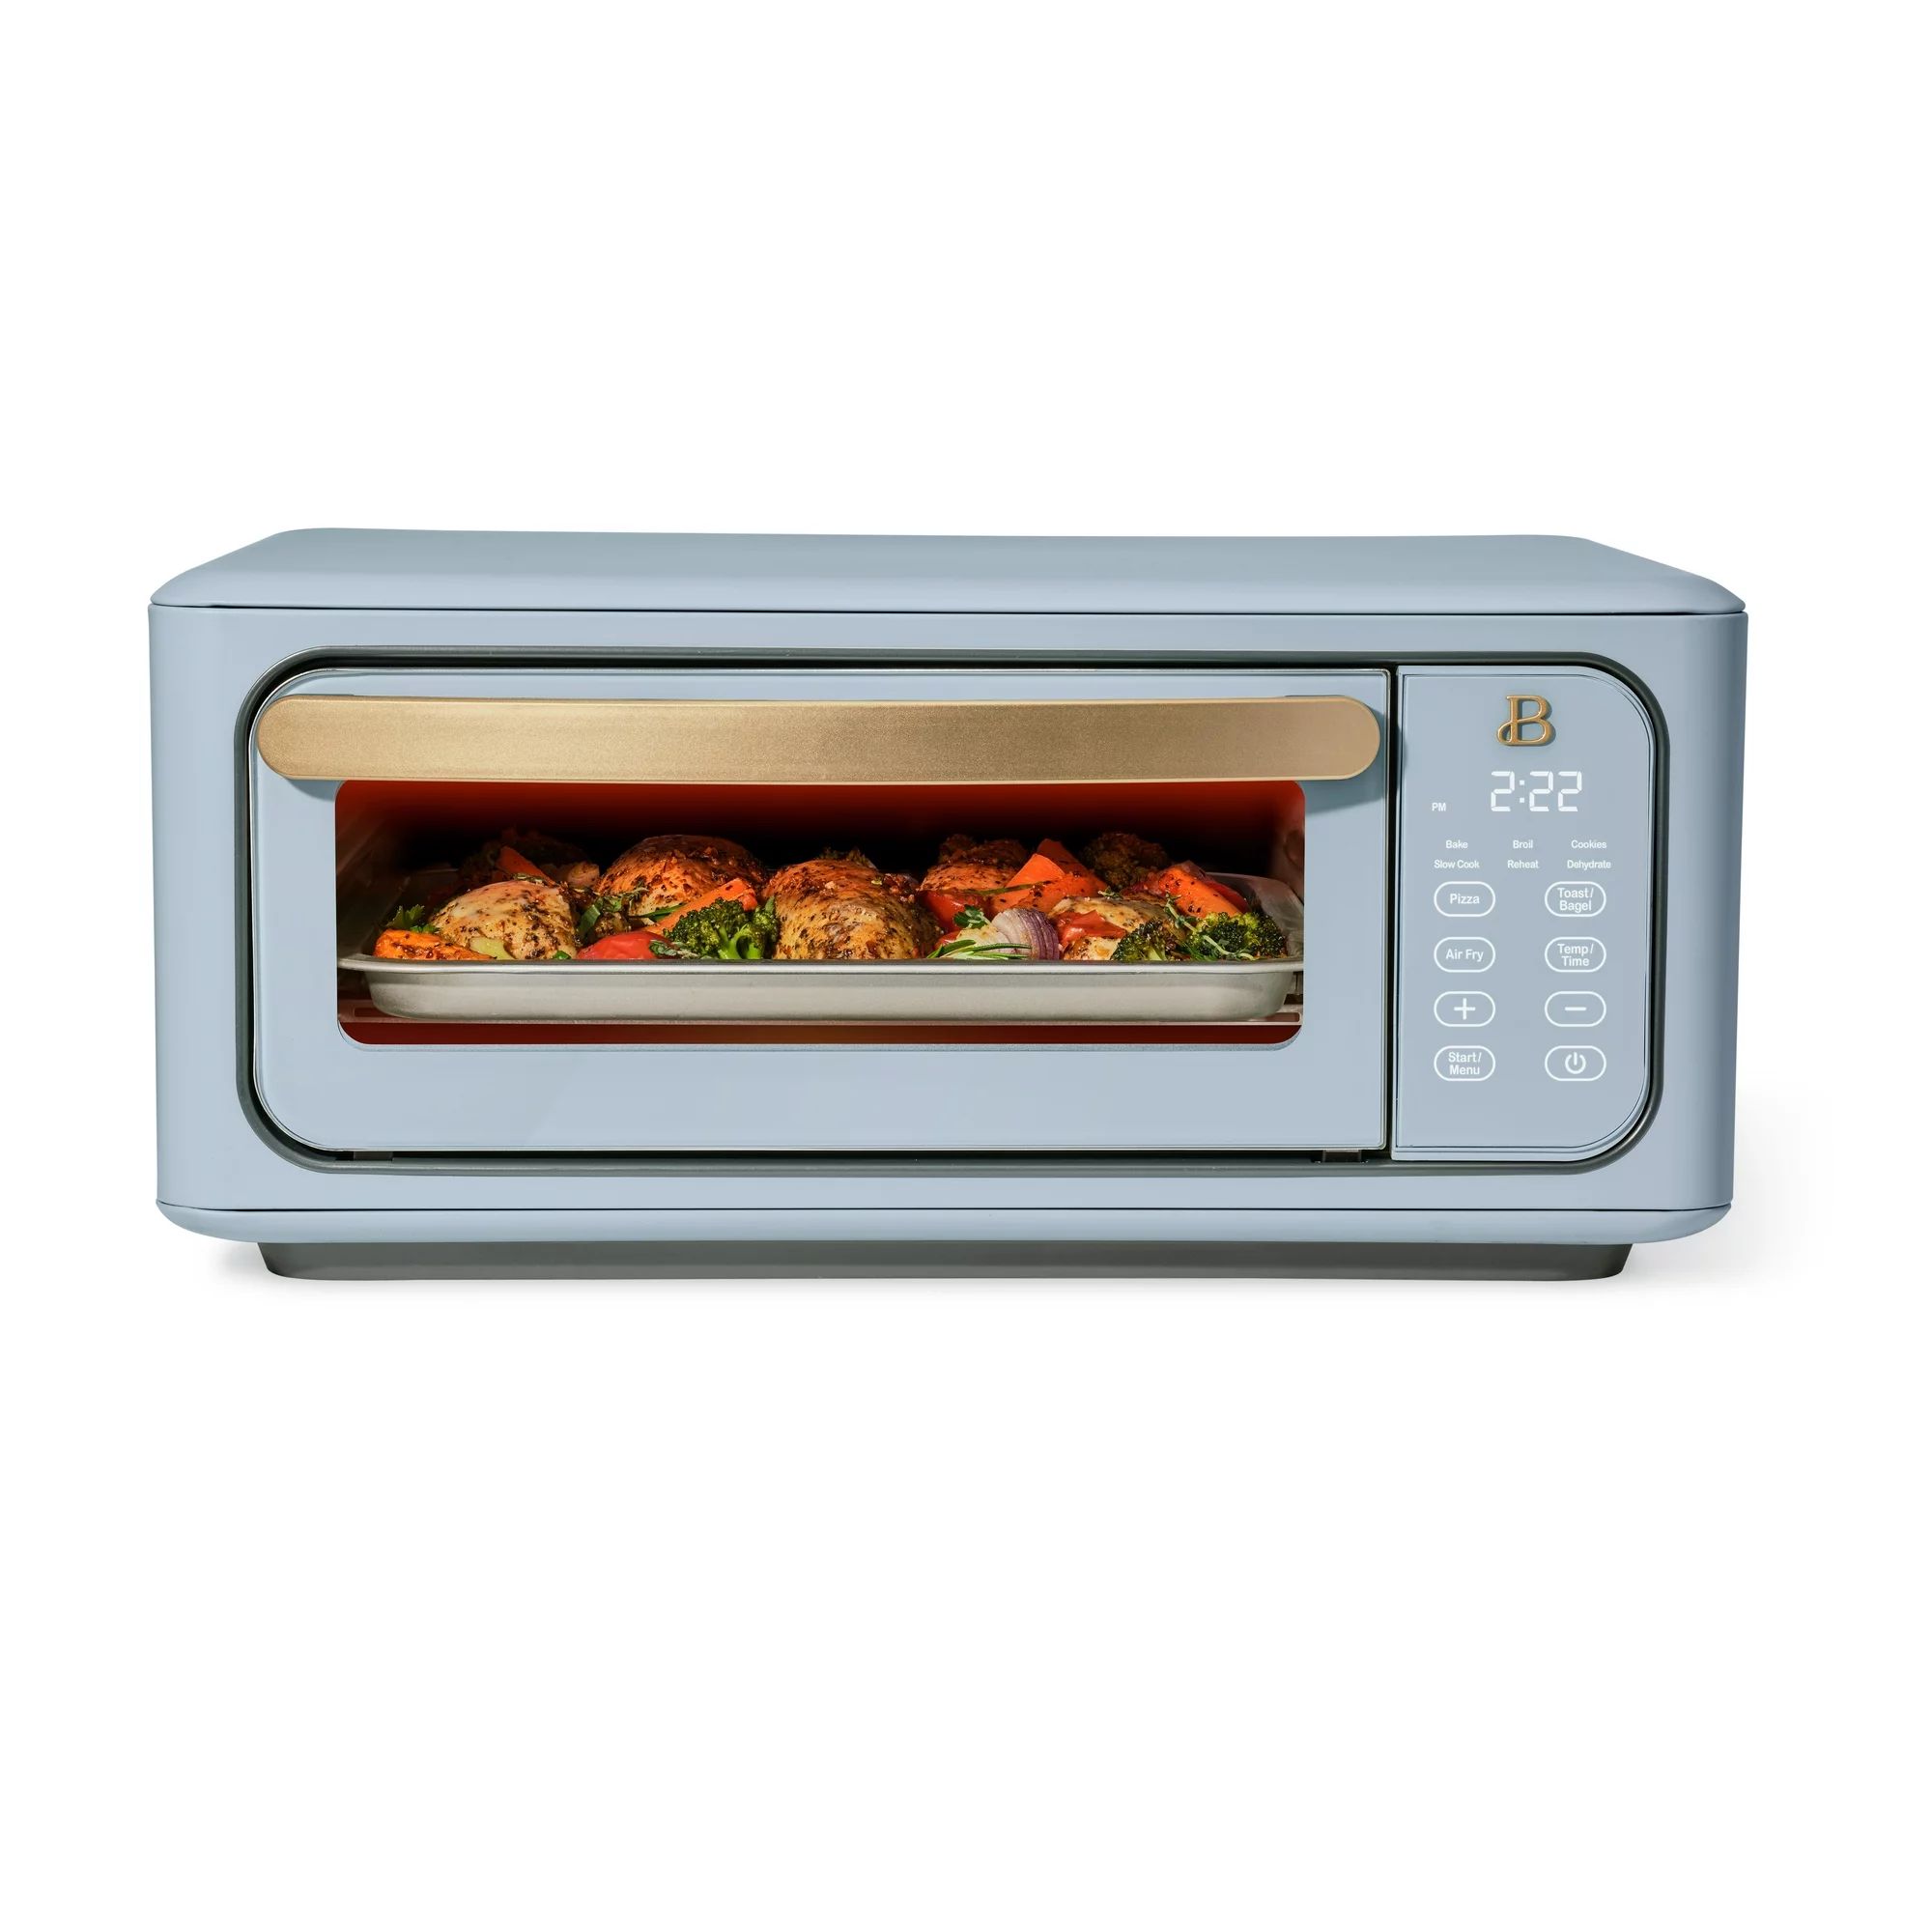 Beautiful Infrared Air Fry Toaster Oven, 9-Slice, 1800 W, White Icing by Drew Barrymore | Walmart (US)